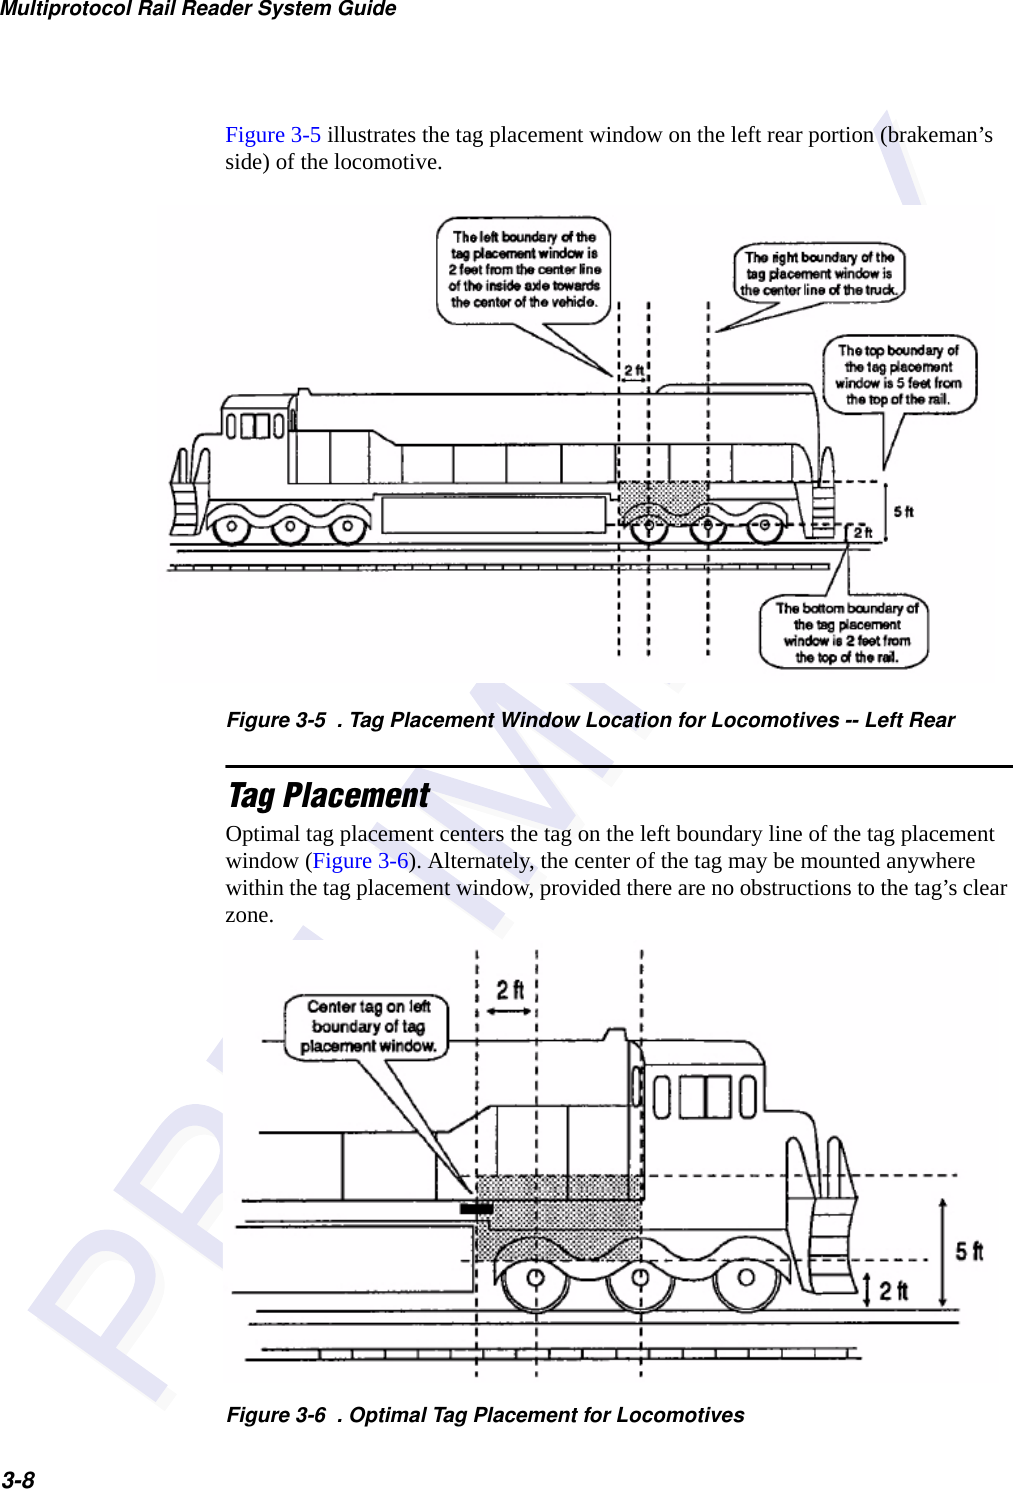 Multiprotocol Rail Reader System Guide3-8Figure 3-5 illustrates the tag placement window on the left rear portion (brakeman’s side) of the locomotive.Figure 3-5  . Tag Placement Window Location for Locomotives -- Left RearTag PlacementOptimal tag placement centers the tag on the left boundary line of the tag placement window (Figure 3-6). Alternately, the center of the tag may be mounted anywhere within the tag placement window, provided there are no obstructions to the tag’s clear zone.Figure 3-6  . Optimal Tag Placement for Locomotives